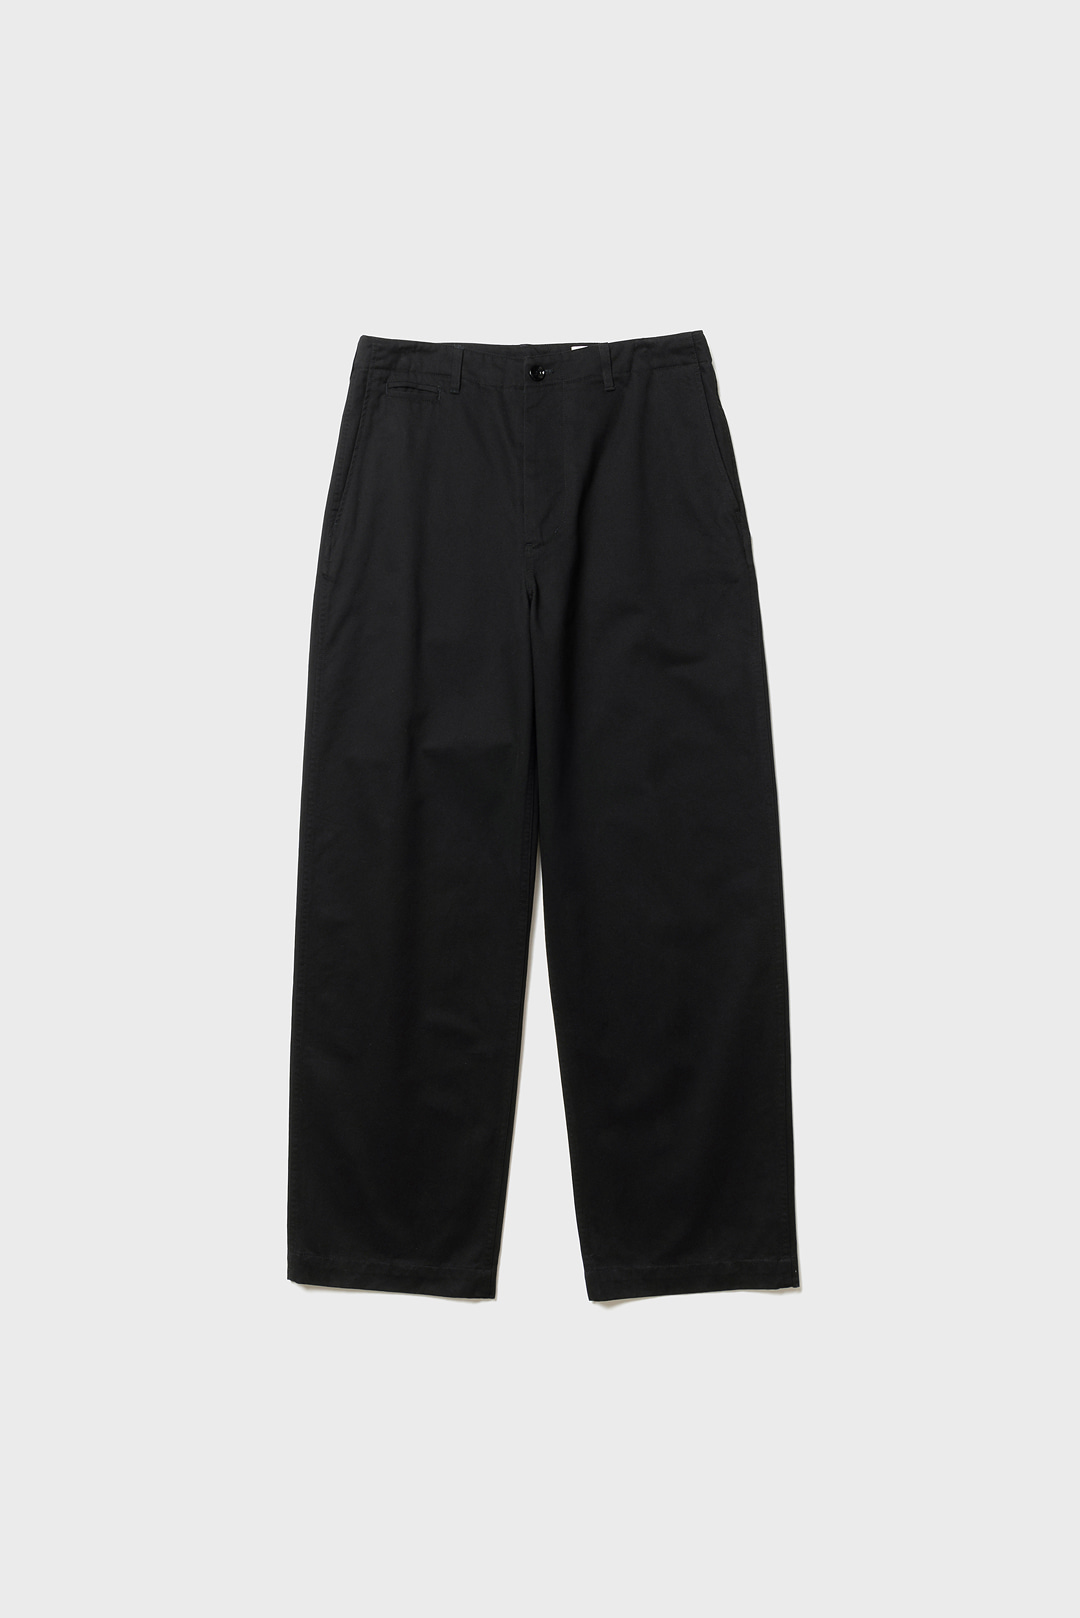 SOFT WASHED WIDE CHINO PANTS (BLACK)